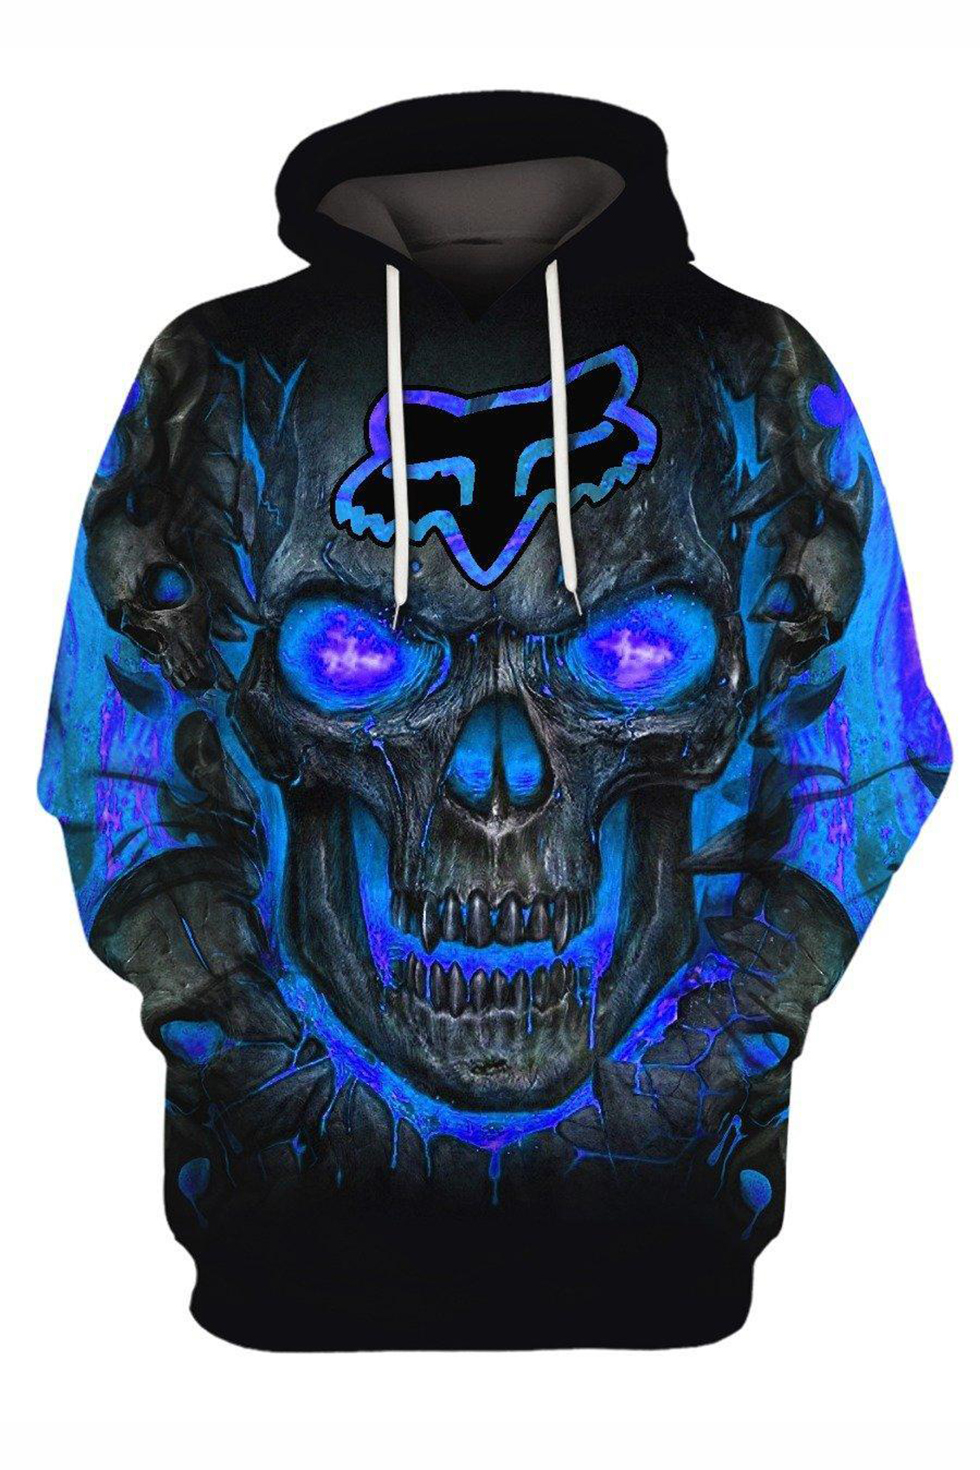 NOT Womens Novelty Hoodies Blue Flaming Skull Grip 3D Print Pullover Hooded Sweatshirt with Pocket 